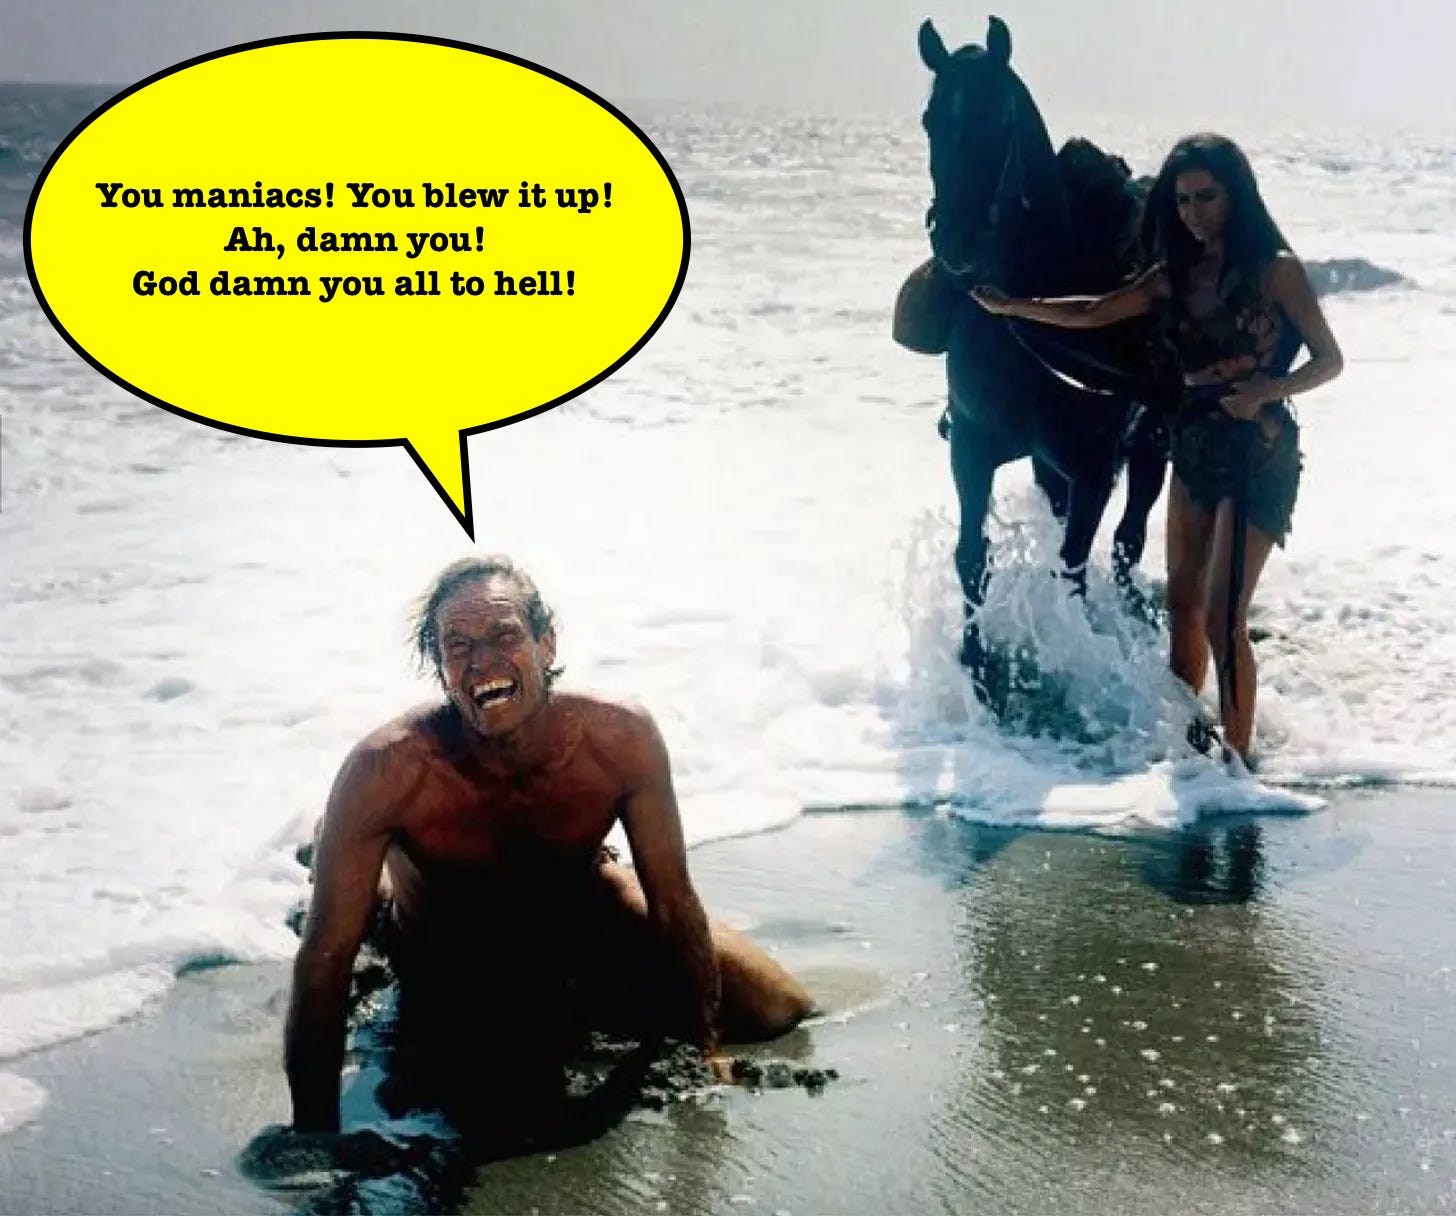 A shirtless man is on his knees on a beach. He has an anguished look on his face. Above his head is a dialogue balloon with the words, "You maniacs! You blew it up! Ah, damn you! God damn you all to hell!" Behind him is a woman standing in the surf looking on. She is holding the reins of a horse that is standing next to her in the water.